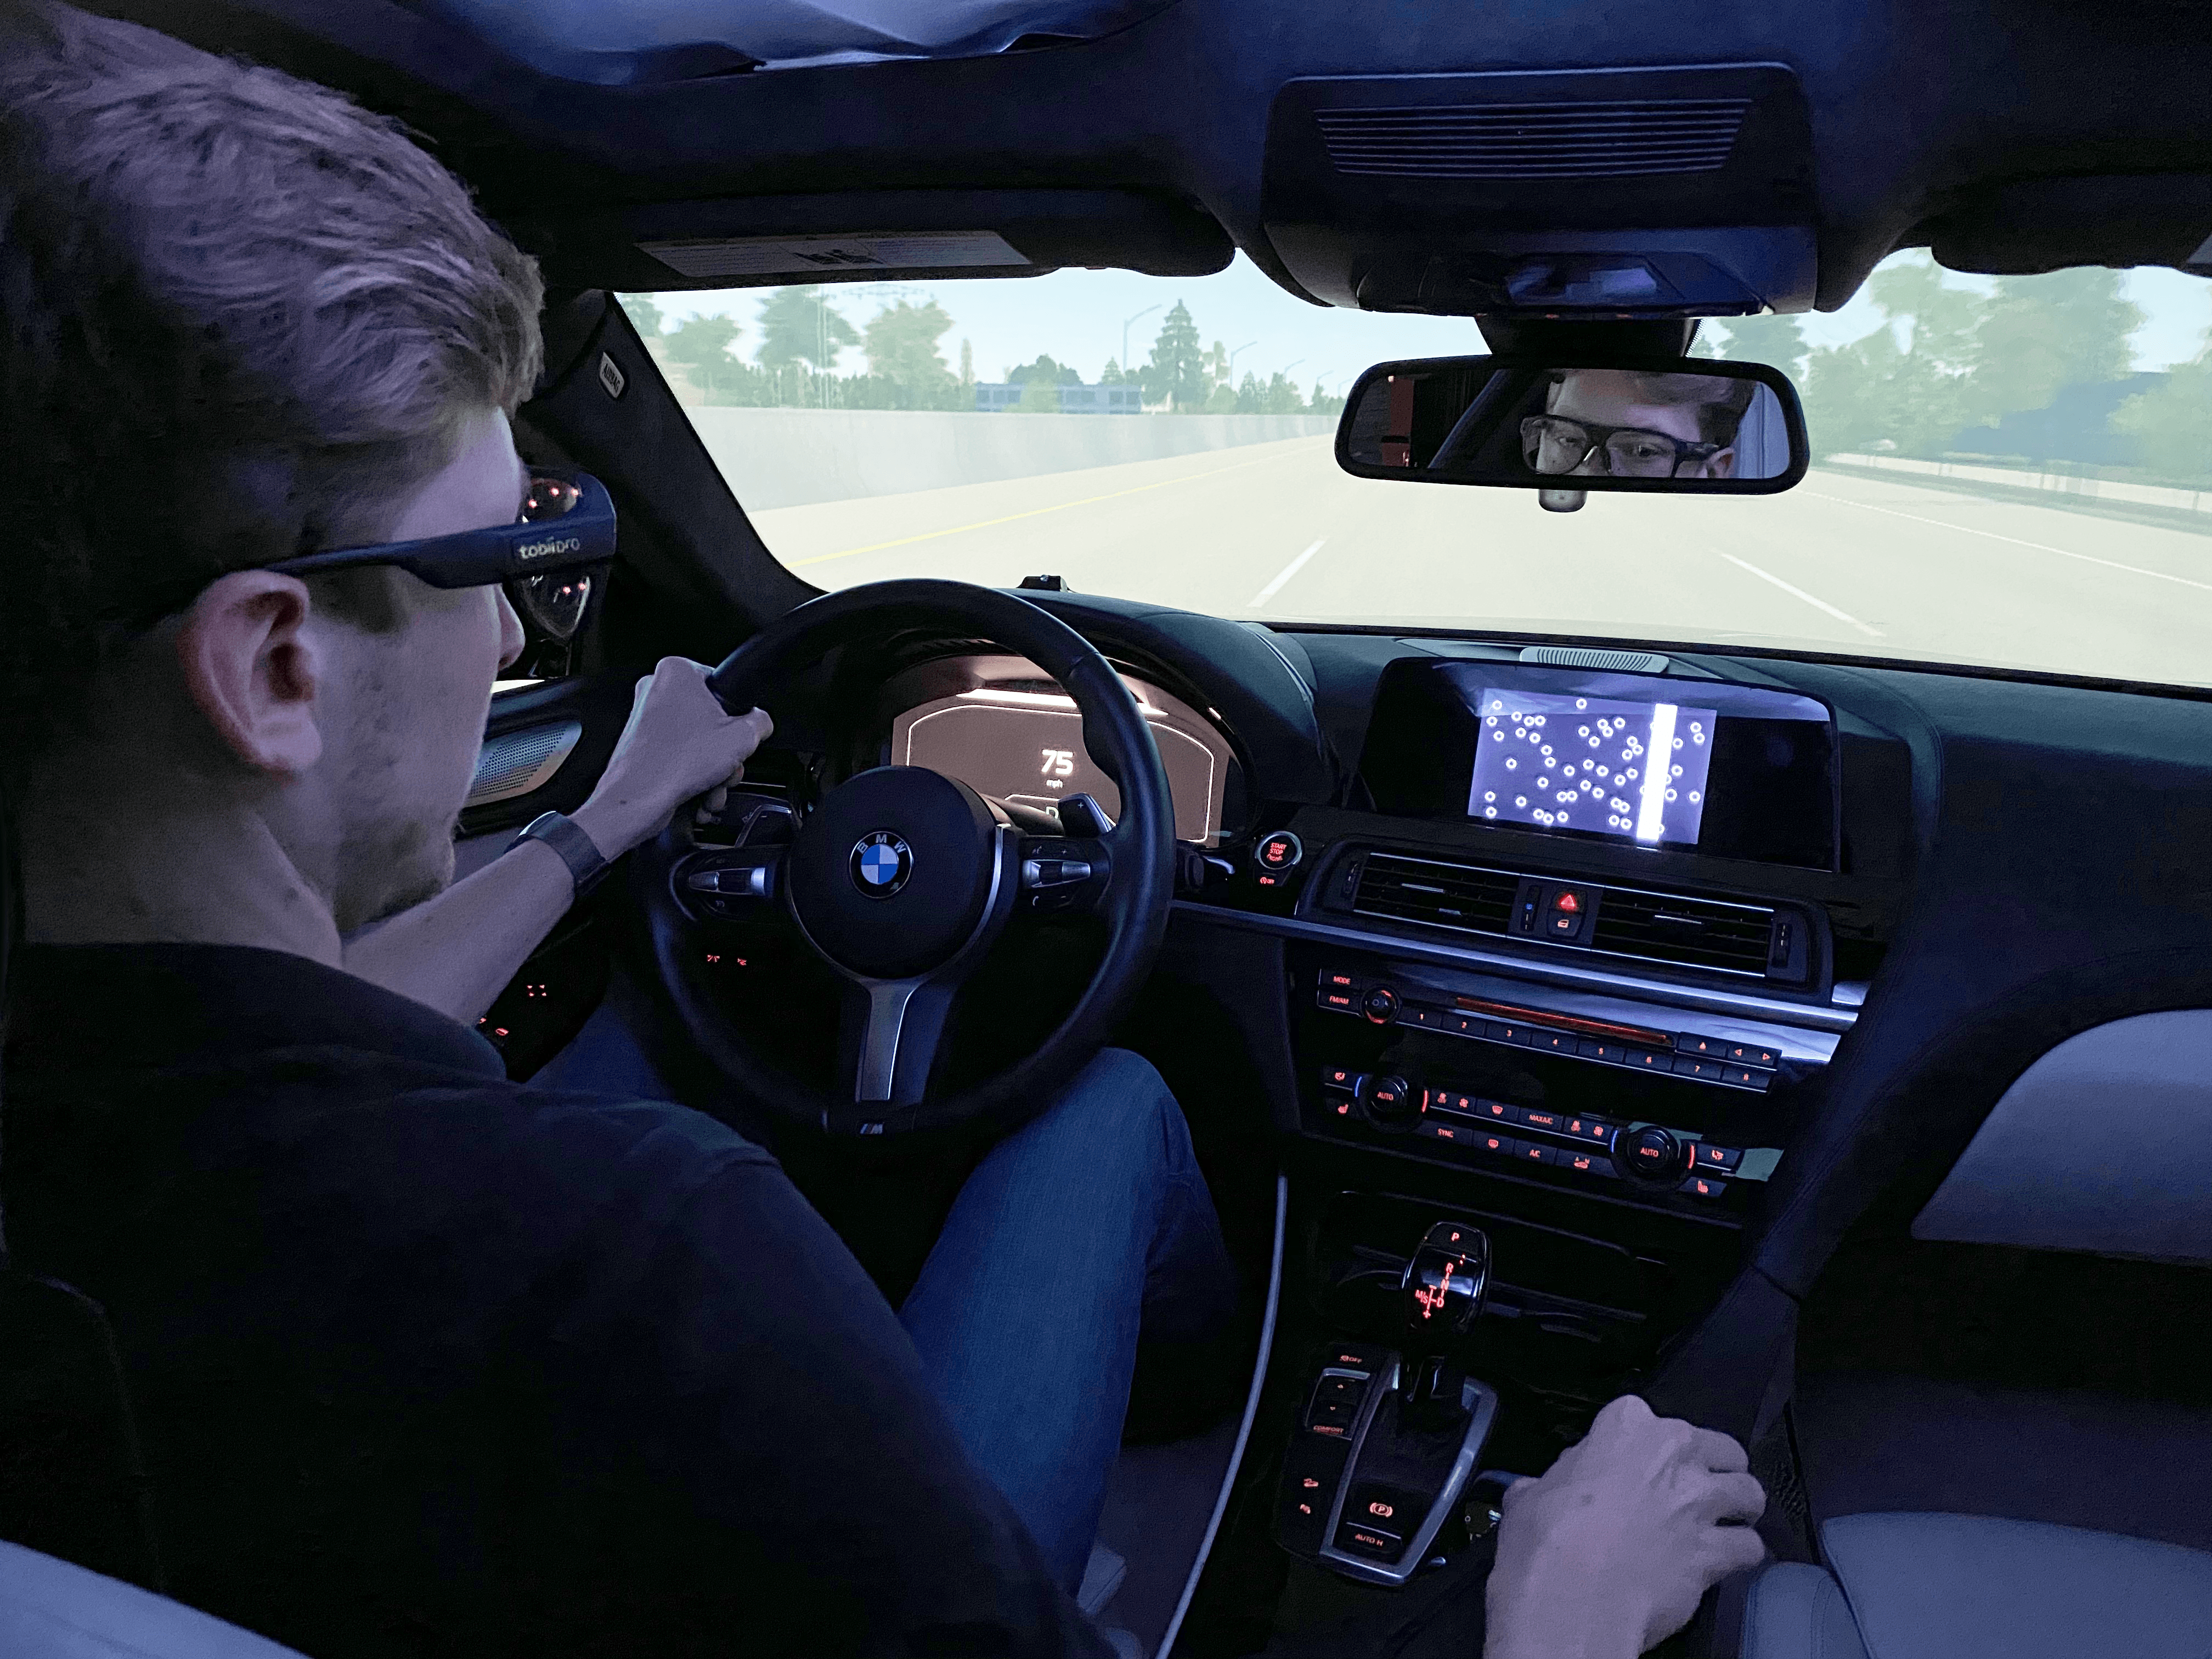 Using Tobii Pro Glasses 3 wearable eye trackers while driving a car